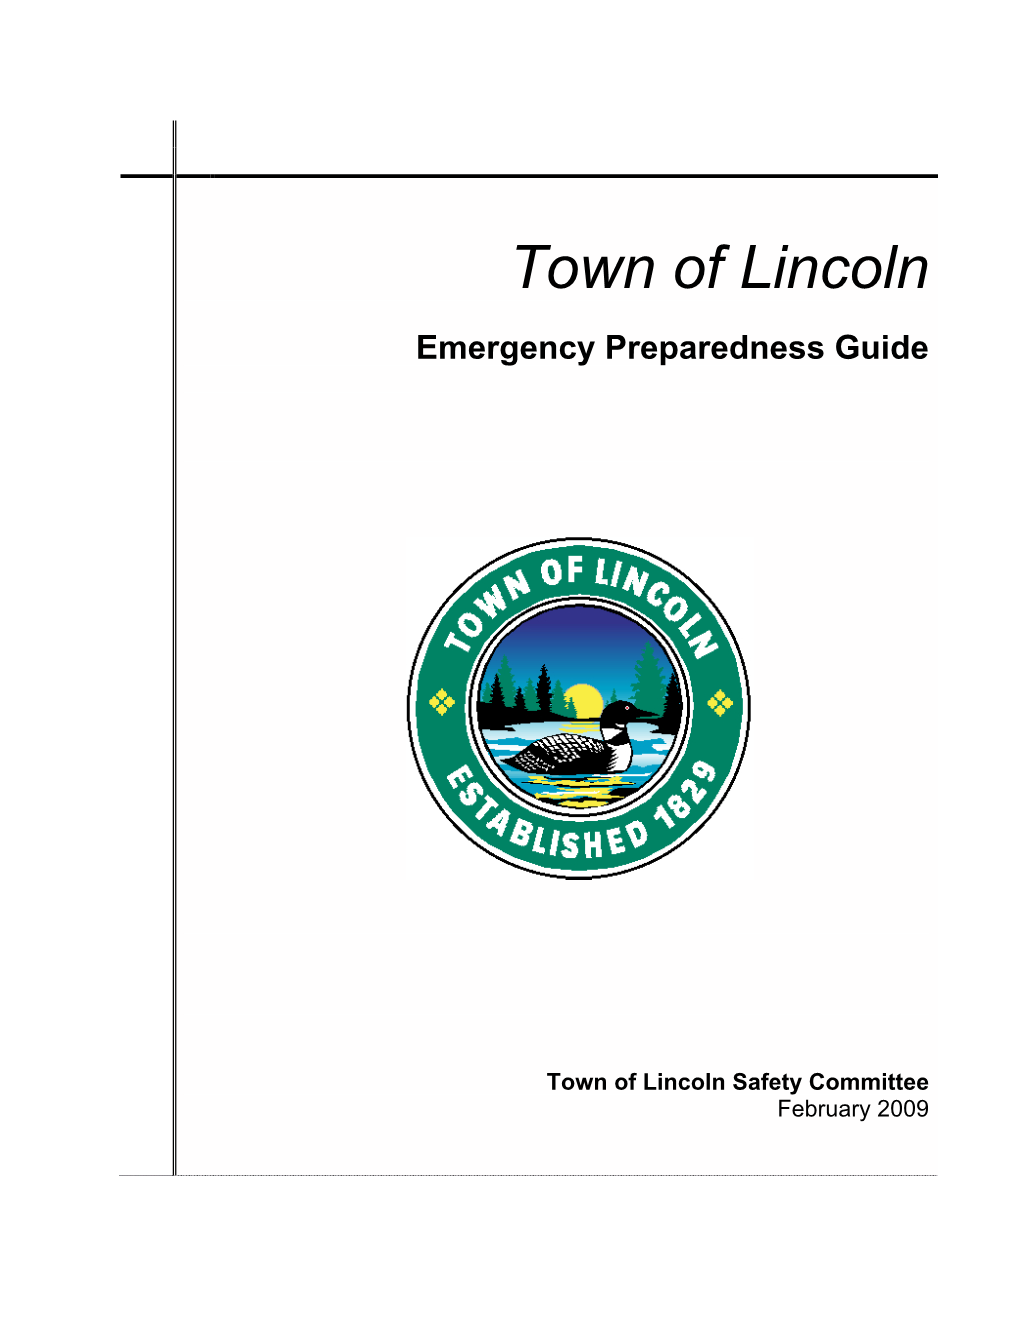 Town of Lincoln Emergency Preparedness Guide